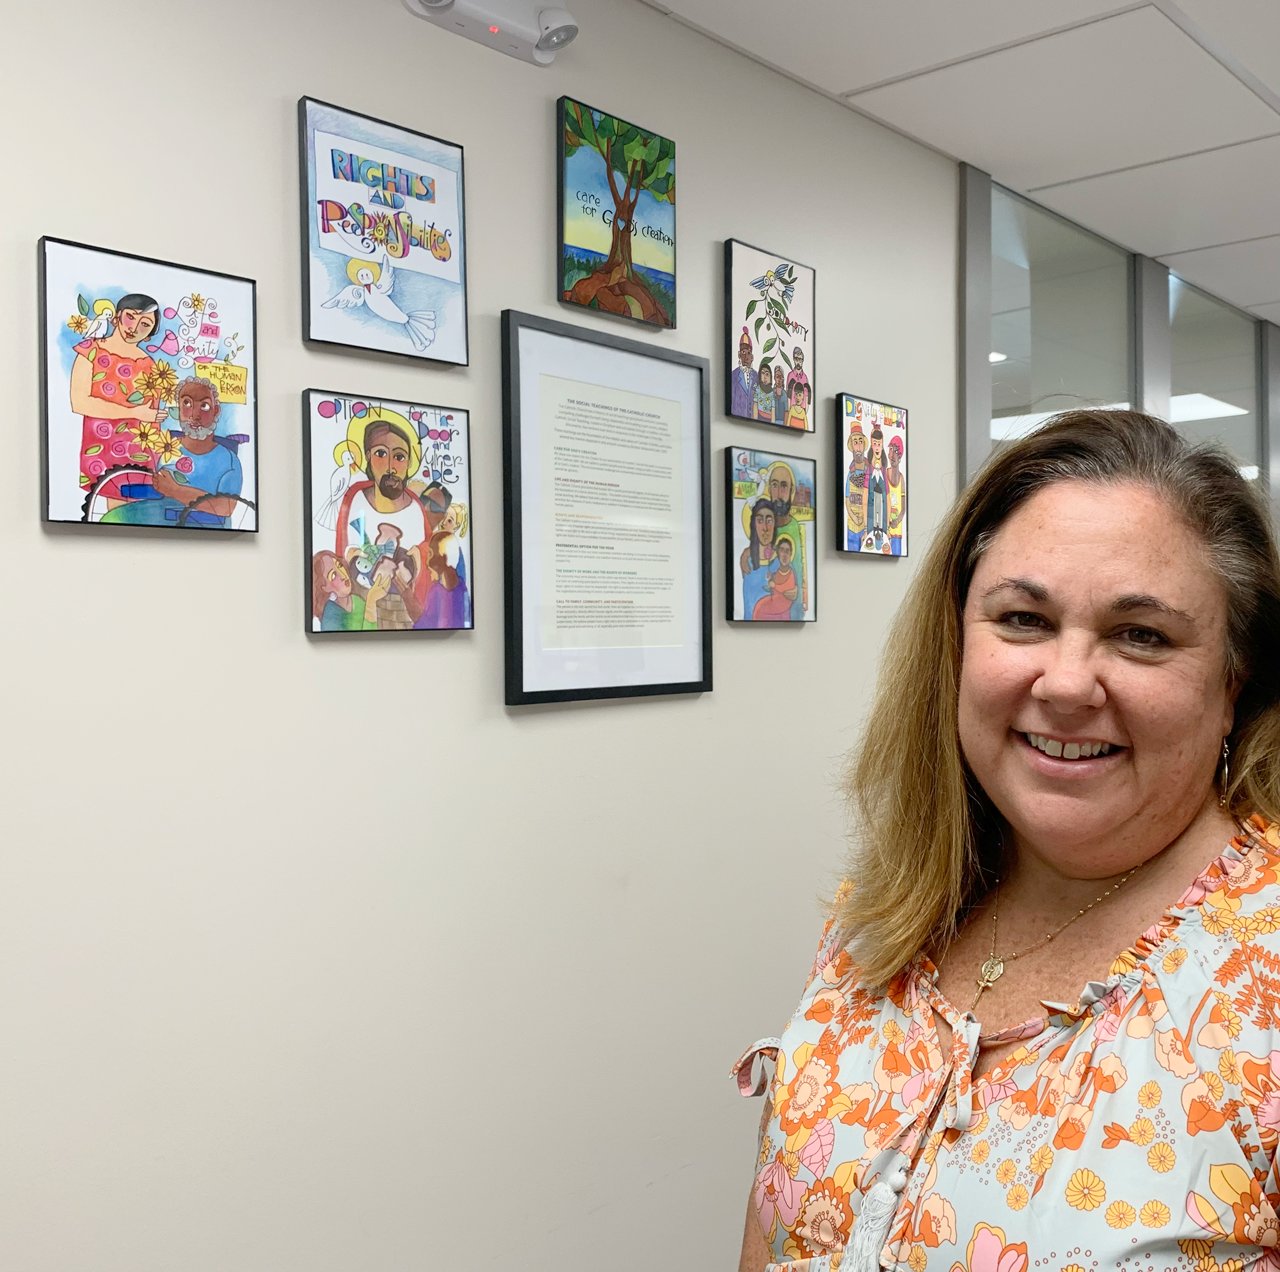 Lori Stoll, Food Programs Coordinator at Catholic Charities of Central and Northern Missouri, brought Brother Mark McGrath’s seven prints depicting Catholic Social Teachings to the waiting area of the central offices at 1015 Edmonds Street, to serve as a reminder that participating in the work of Catholic Charities is a participation in the ministry of Christ.